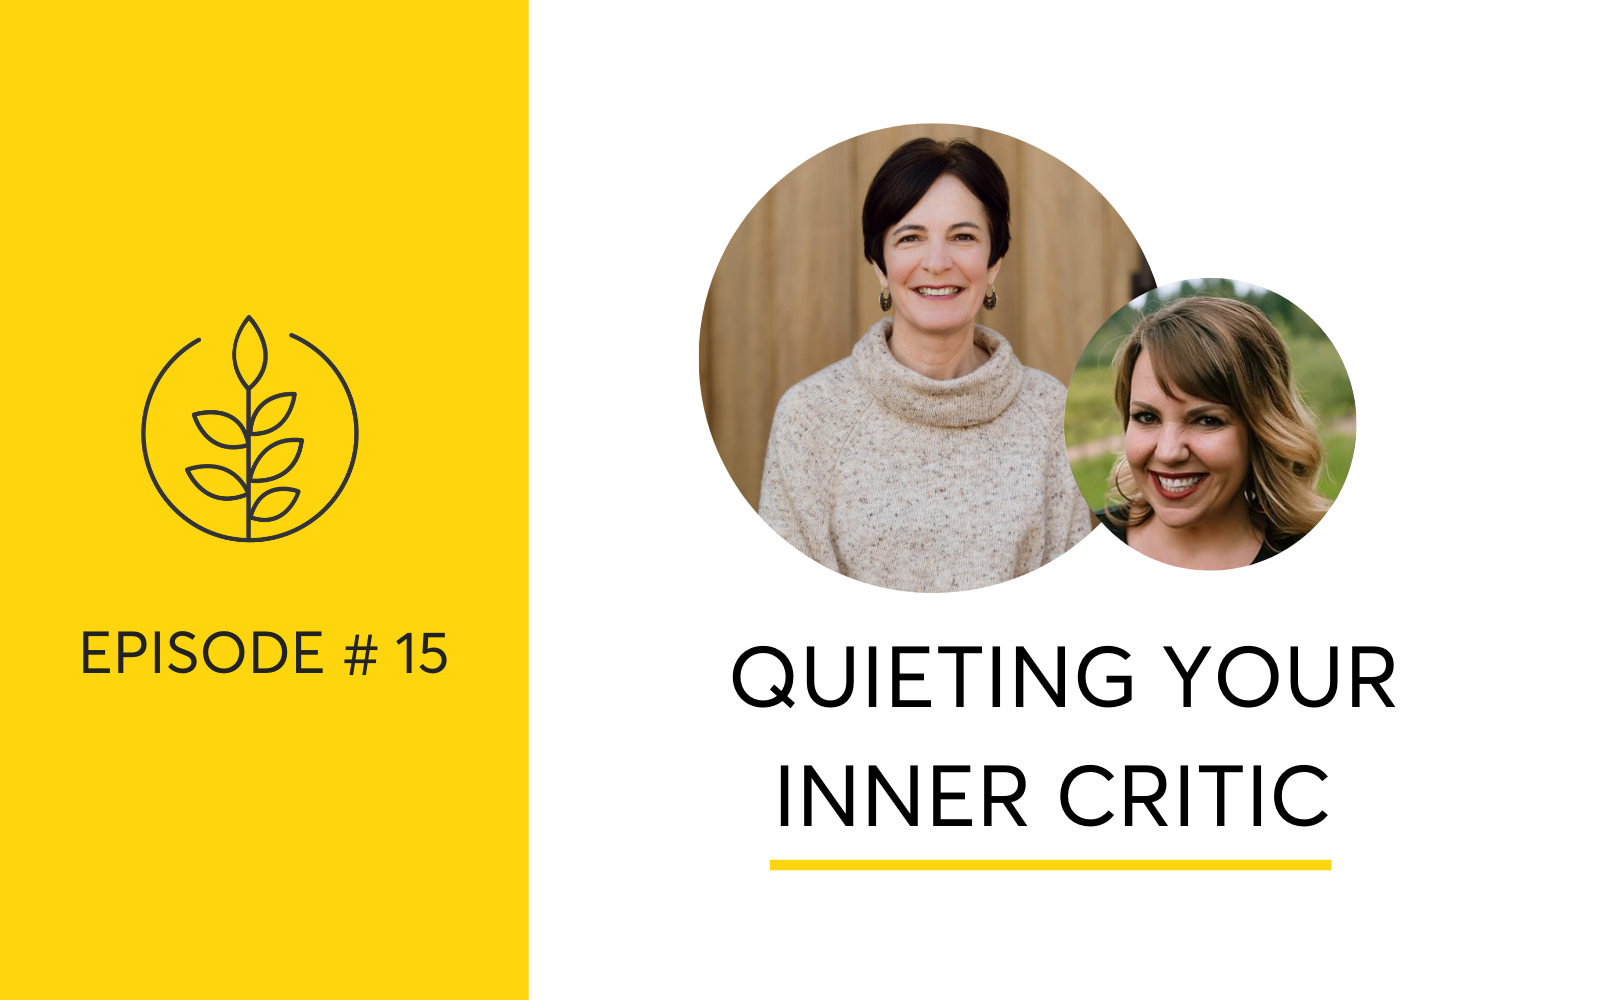 Your inner critic and negative self-talk isn’t helping you [it’s just making you miserable]